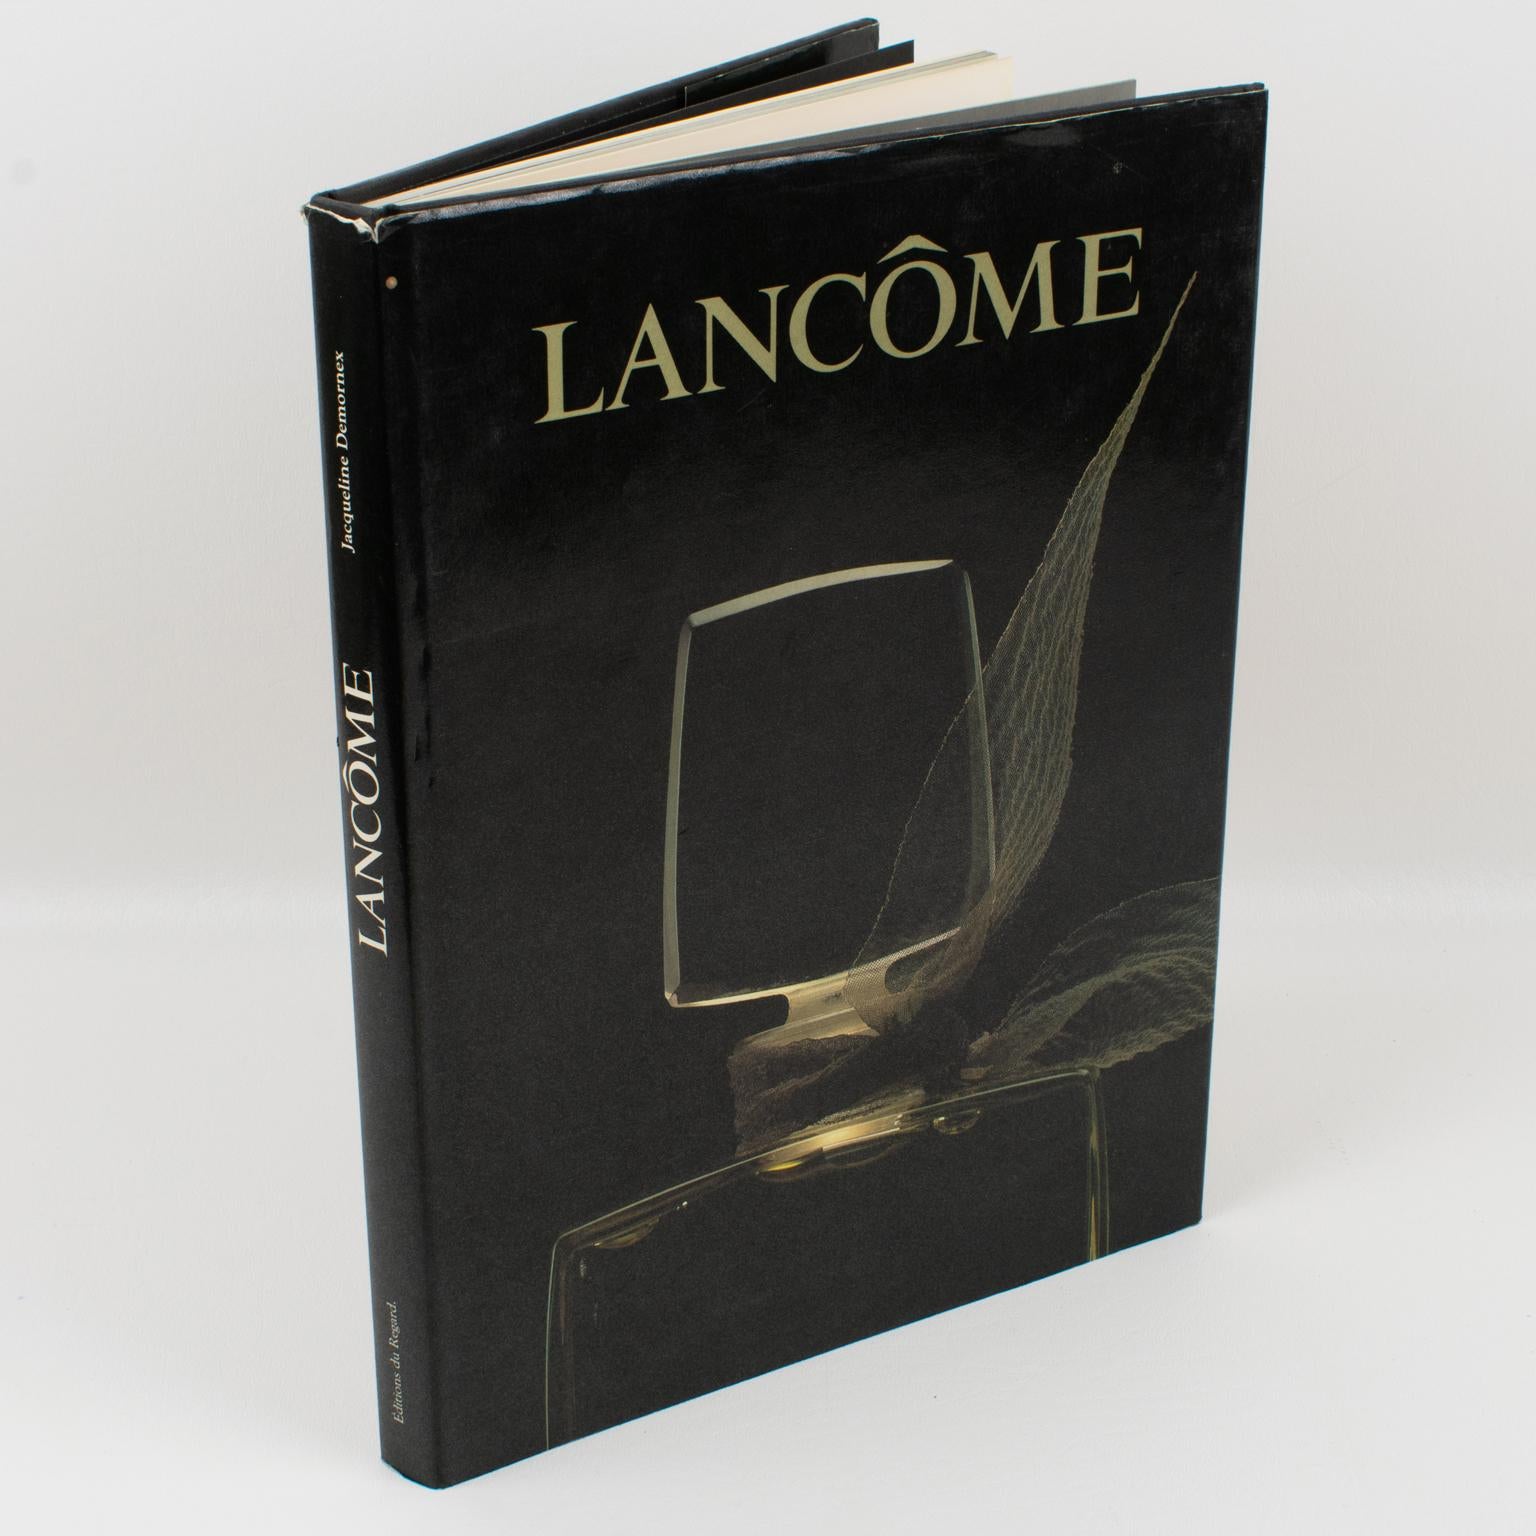 Lancome, French Book by Jacqueline Demornex, 1985.
With the assistance of Jean-Claude Herve. Preface Francois Dalle. Photography by Jacques Boulay. Extensively illustrated.
